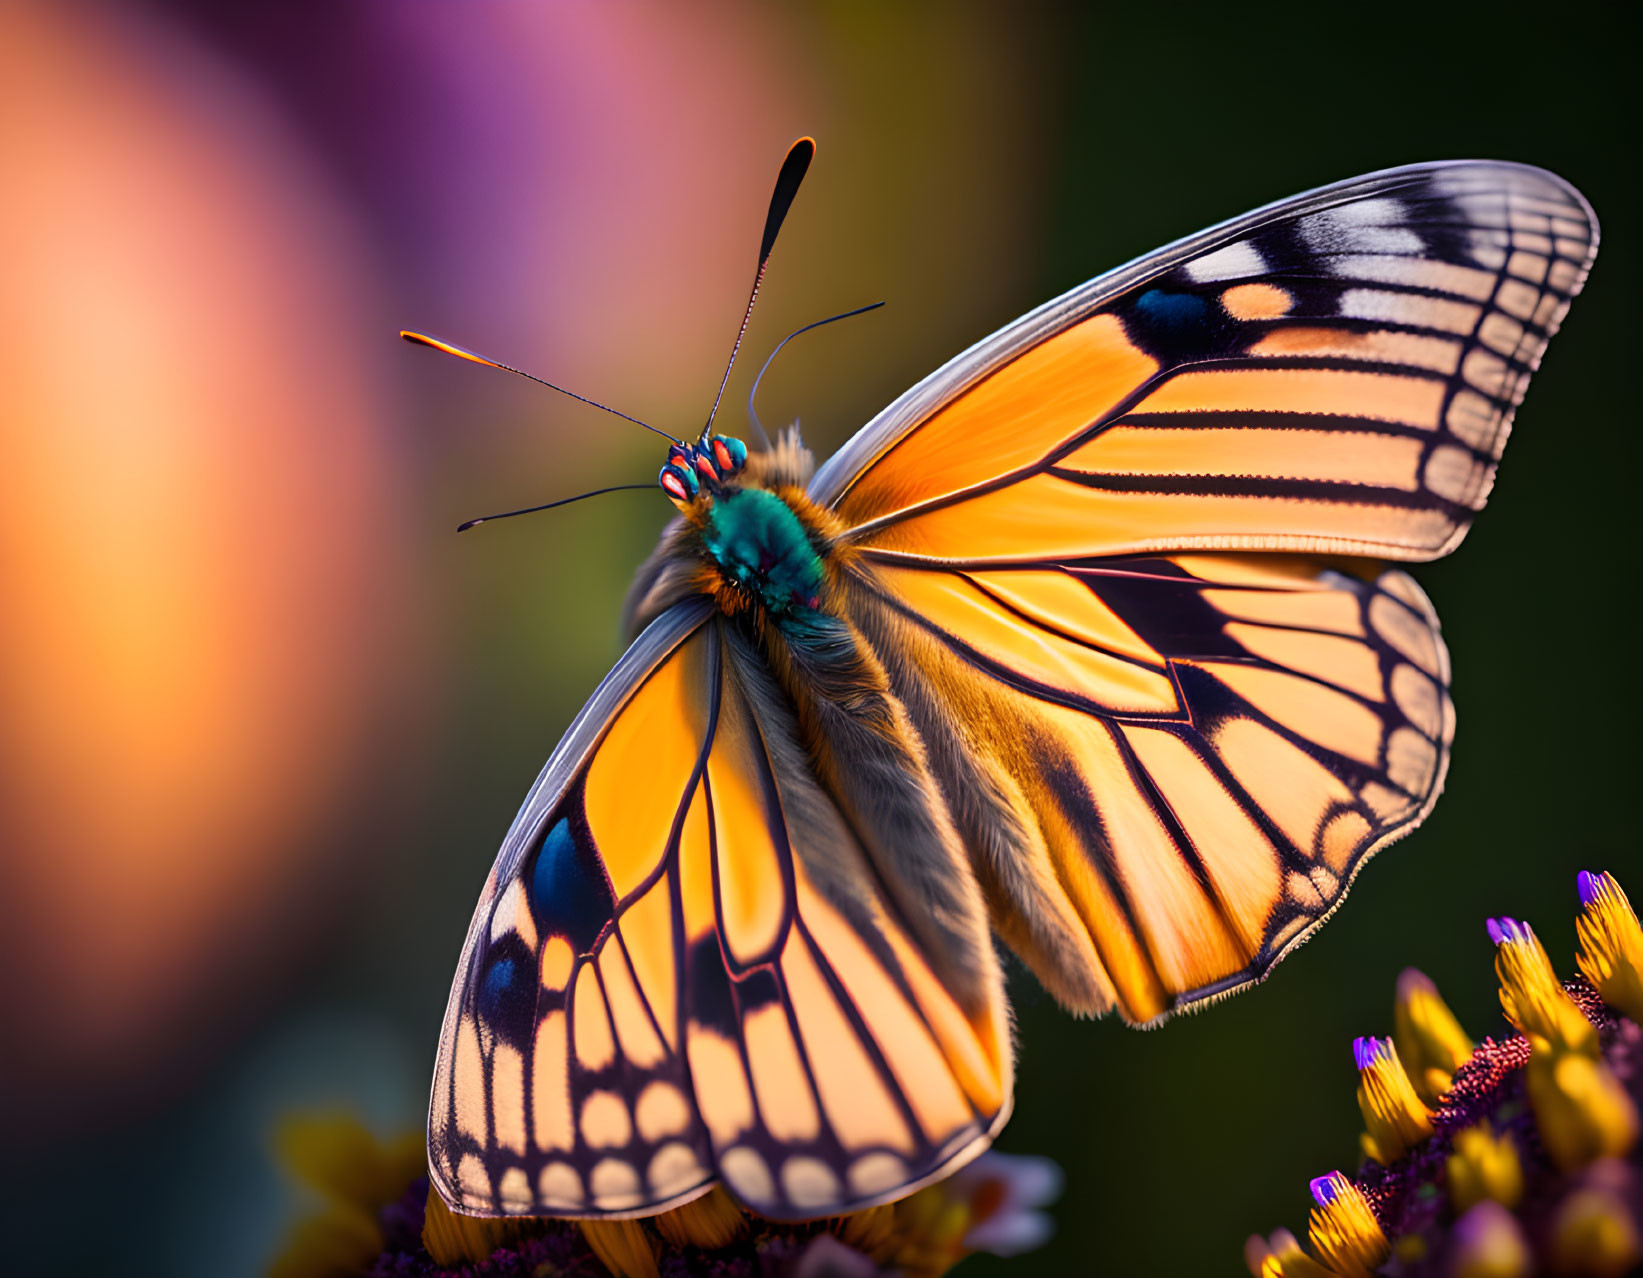 Colorful Butterfly on Purple and Yellow Flowers with Soft-focus Background